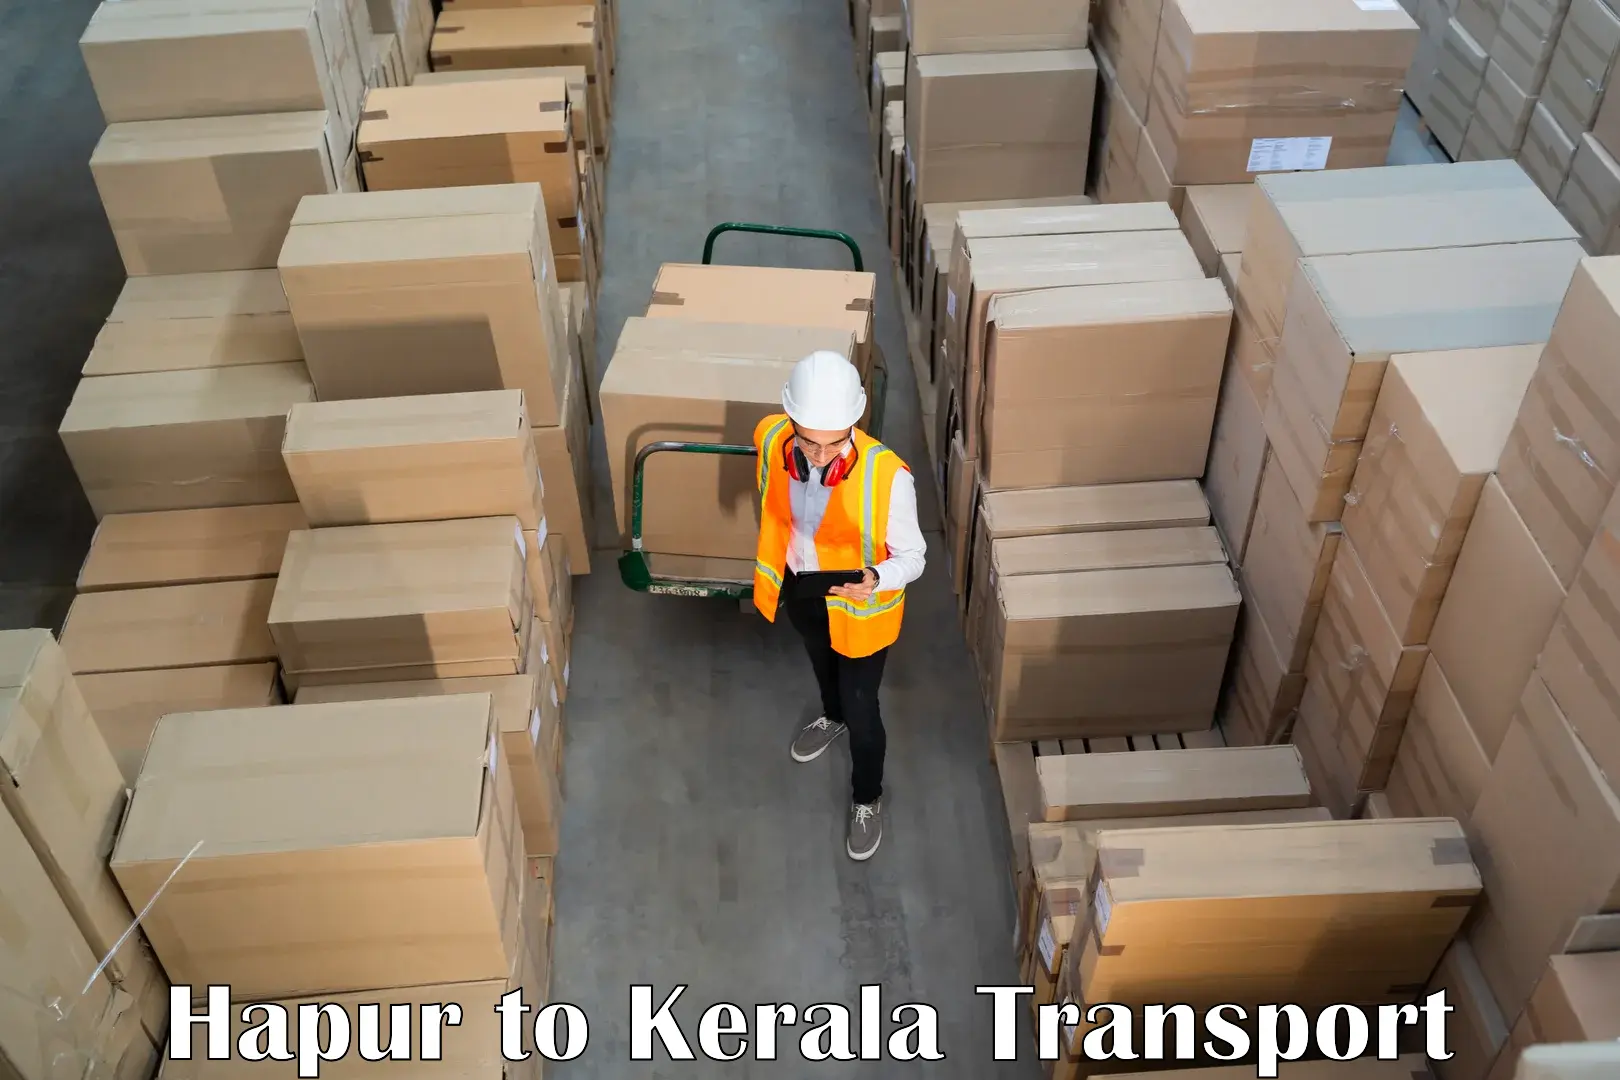 Goods delivery service Hapur to Thrissur